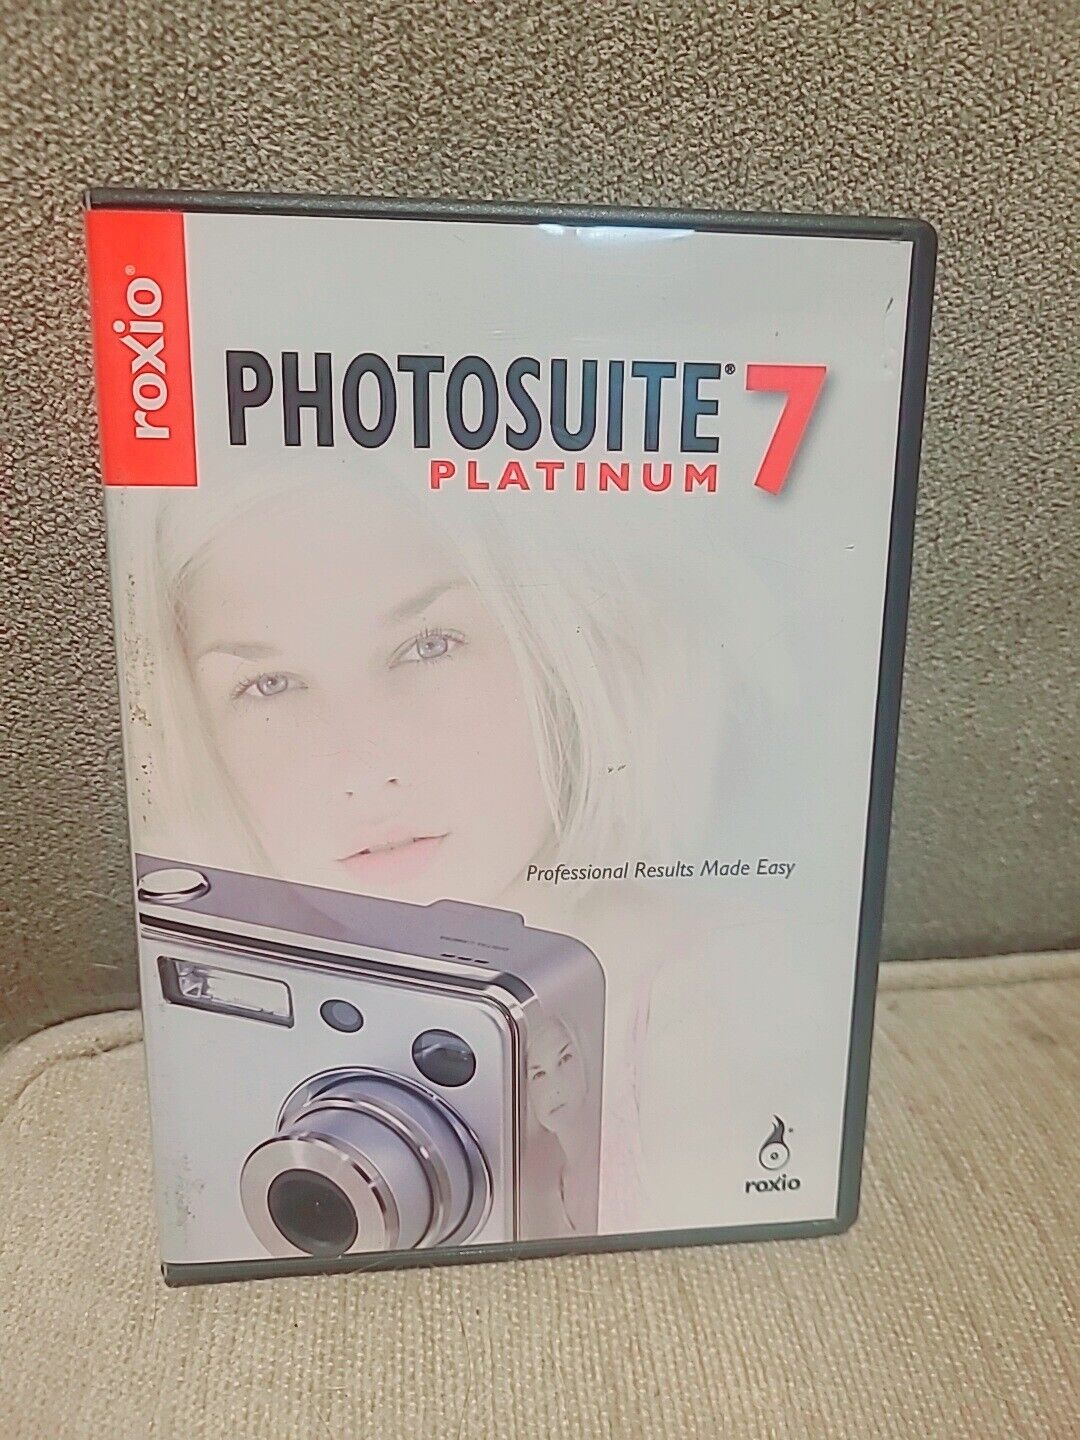 Roxio Photosuite 7 Platinum Vintage Software CD Complete  New/Opened Box